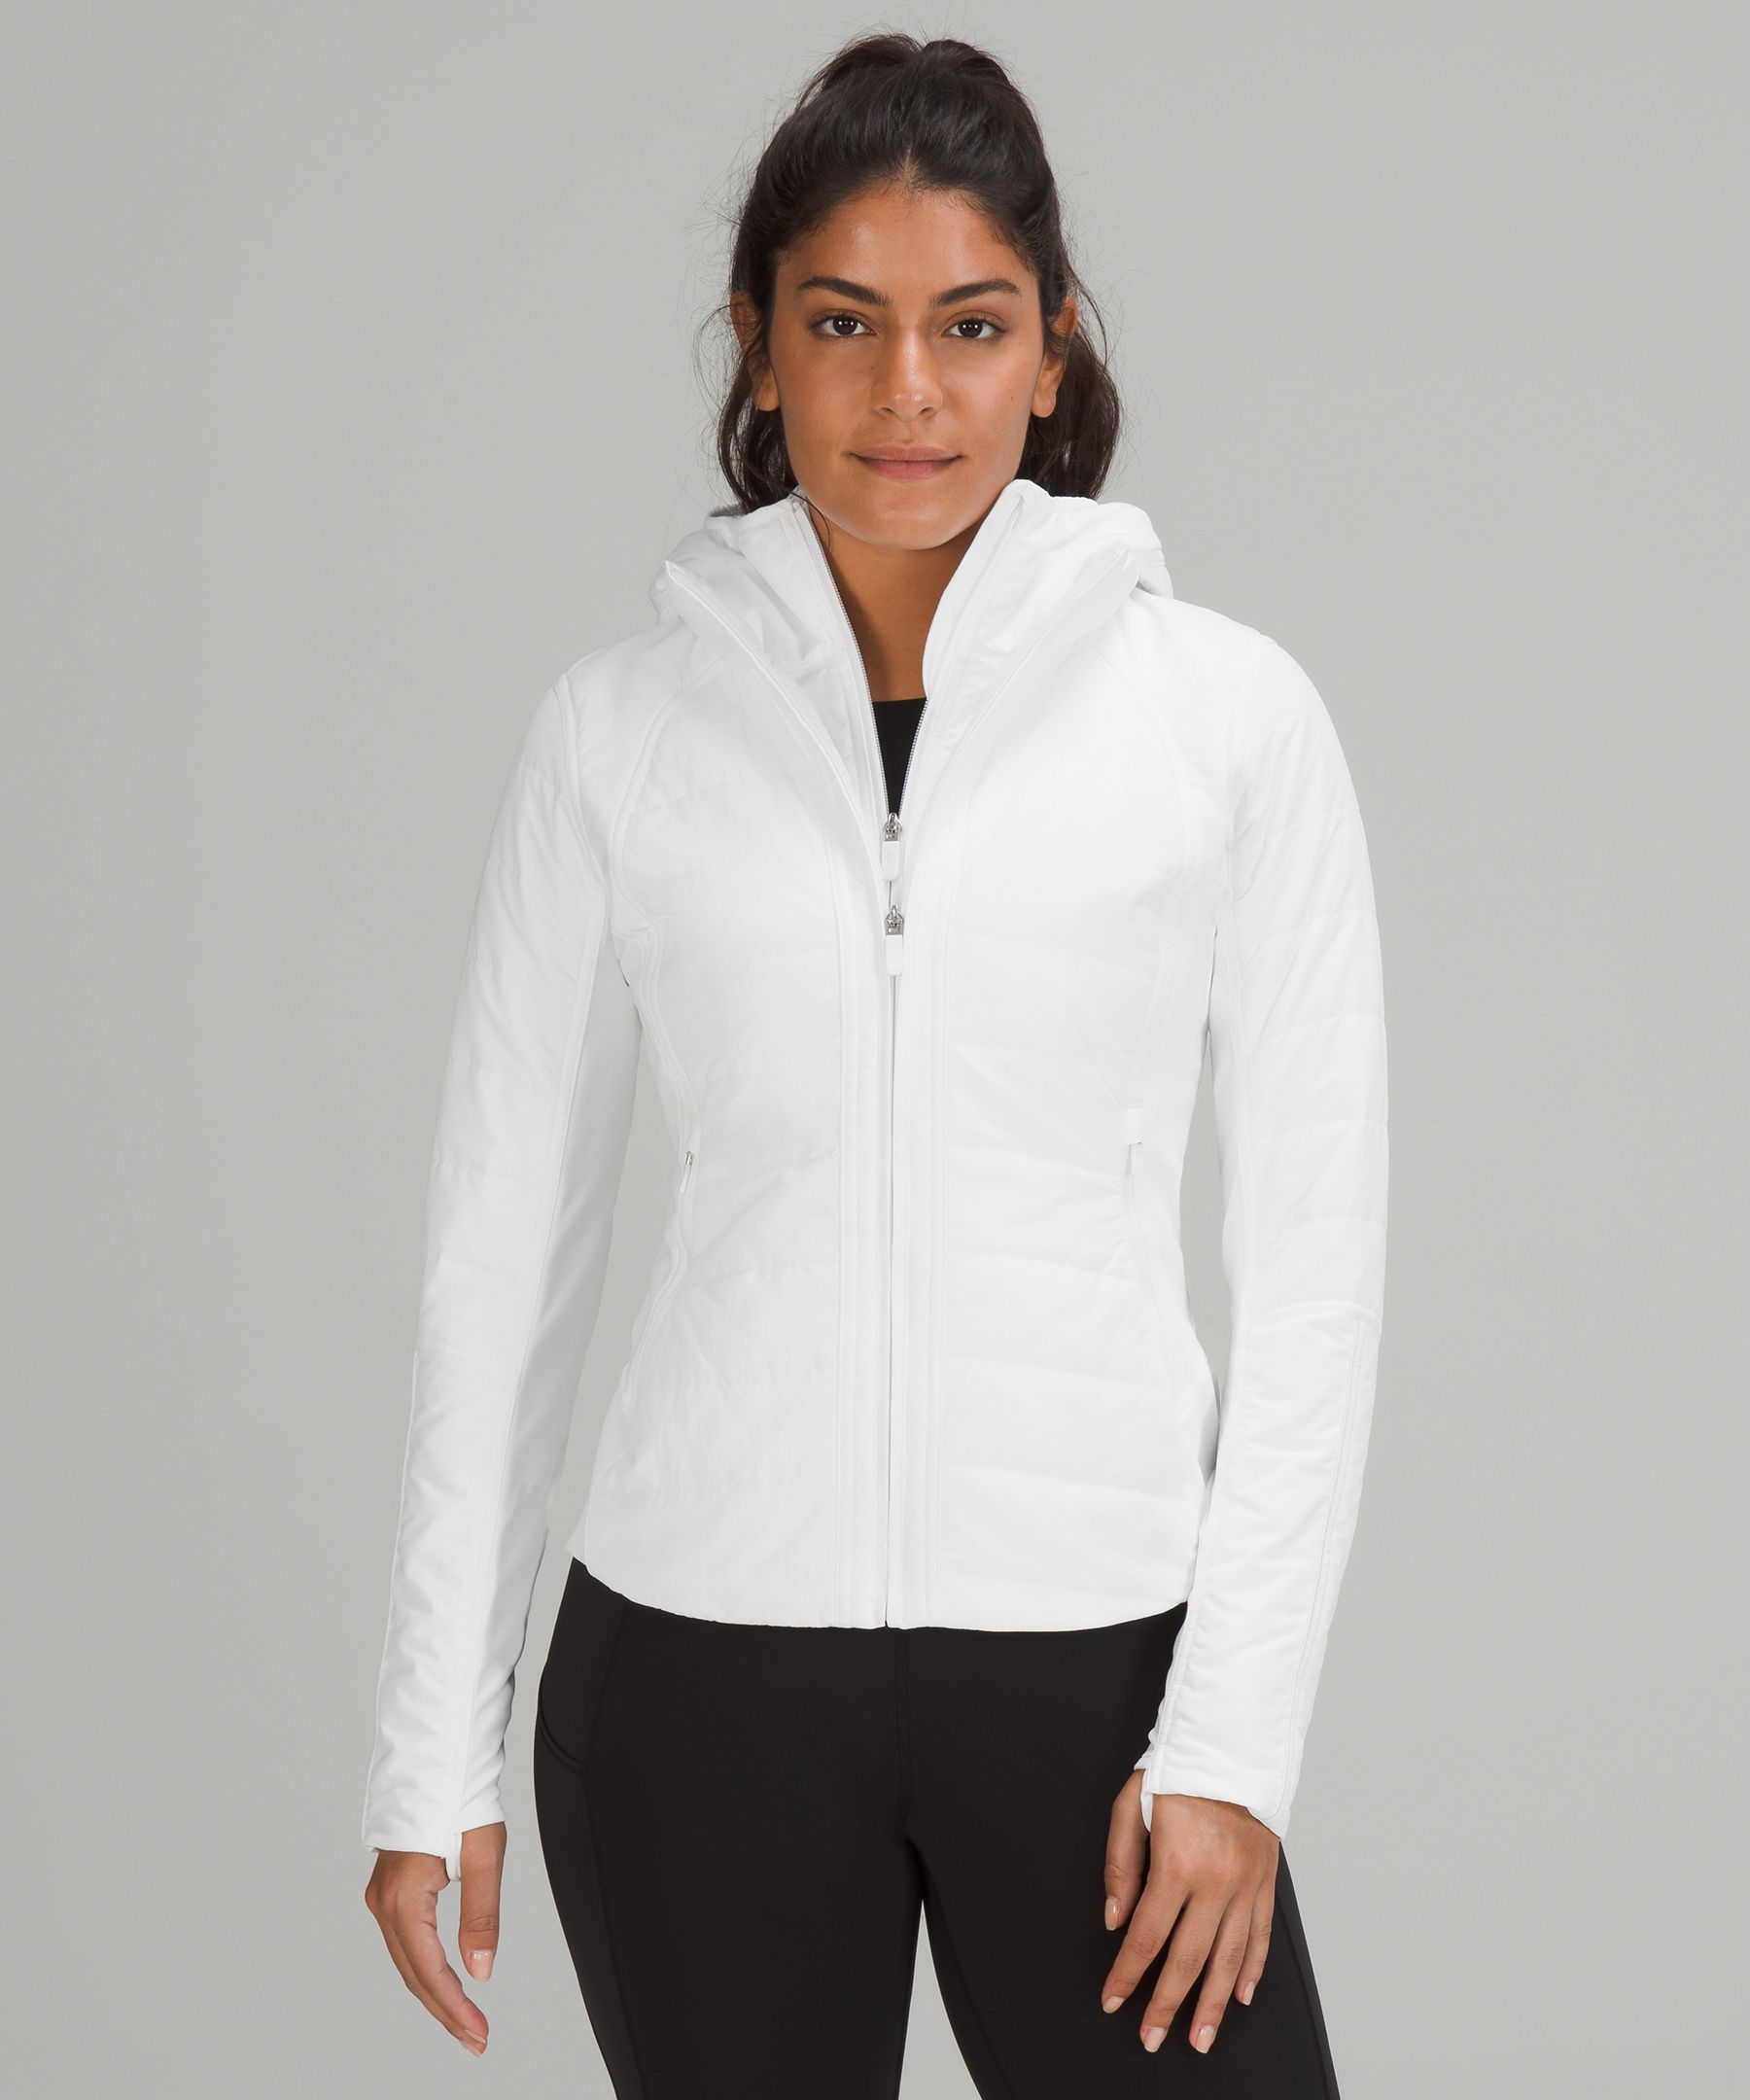 Why Lululemon's Another Mile Jacket is My Top Winter Workout Gear